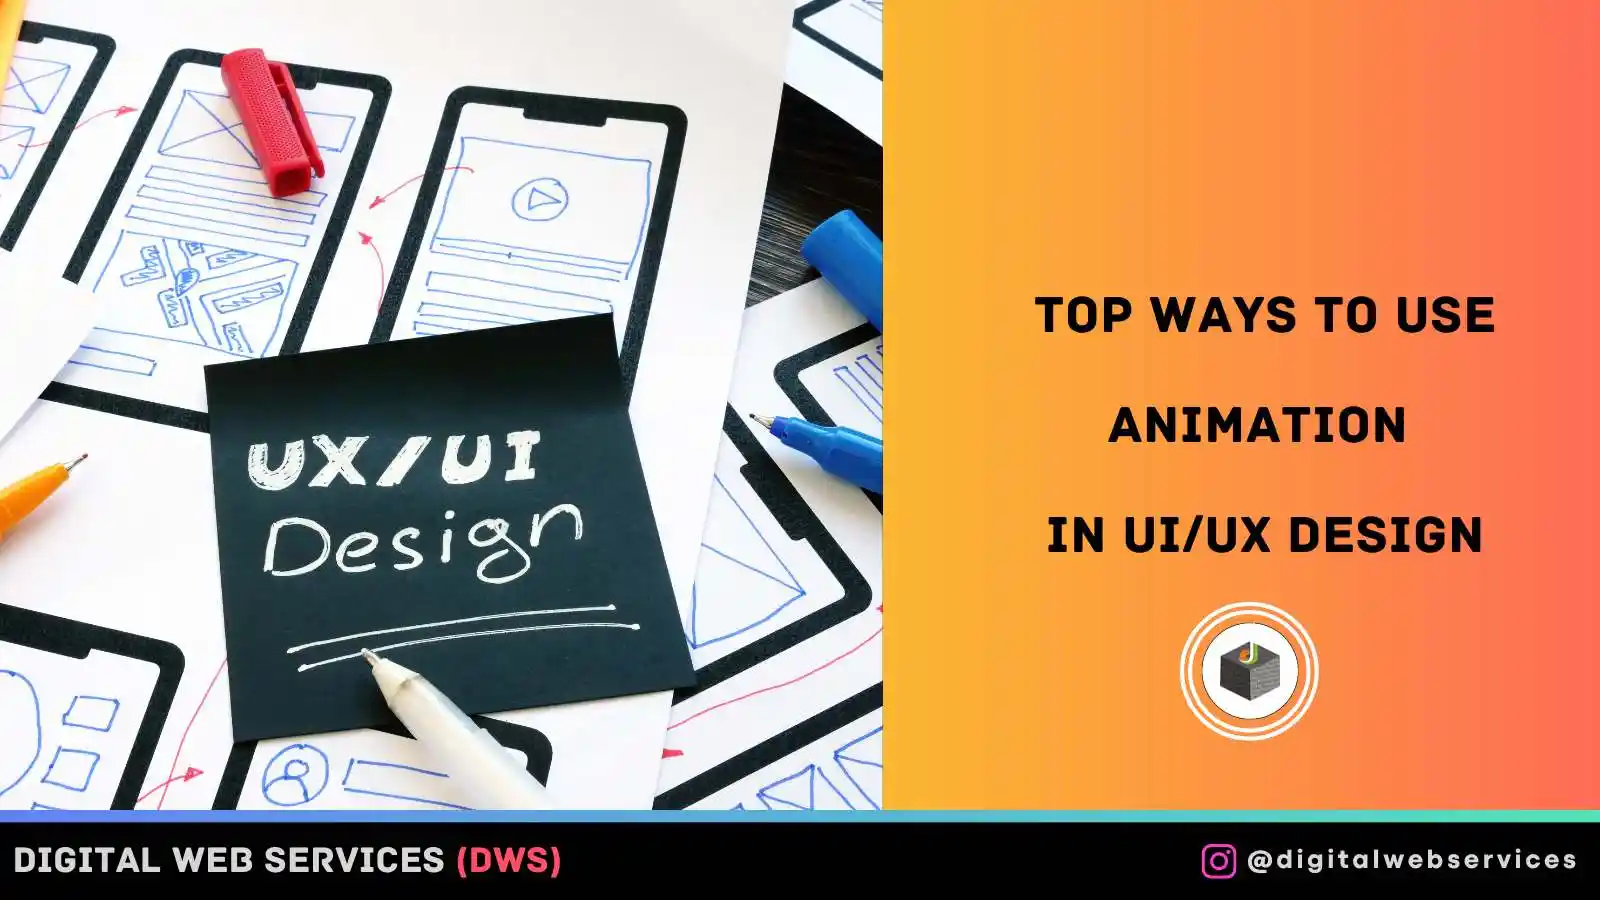 Top 4 Ways to Use Animation in UI_UX Design